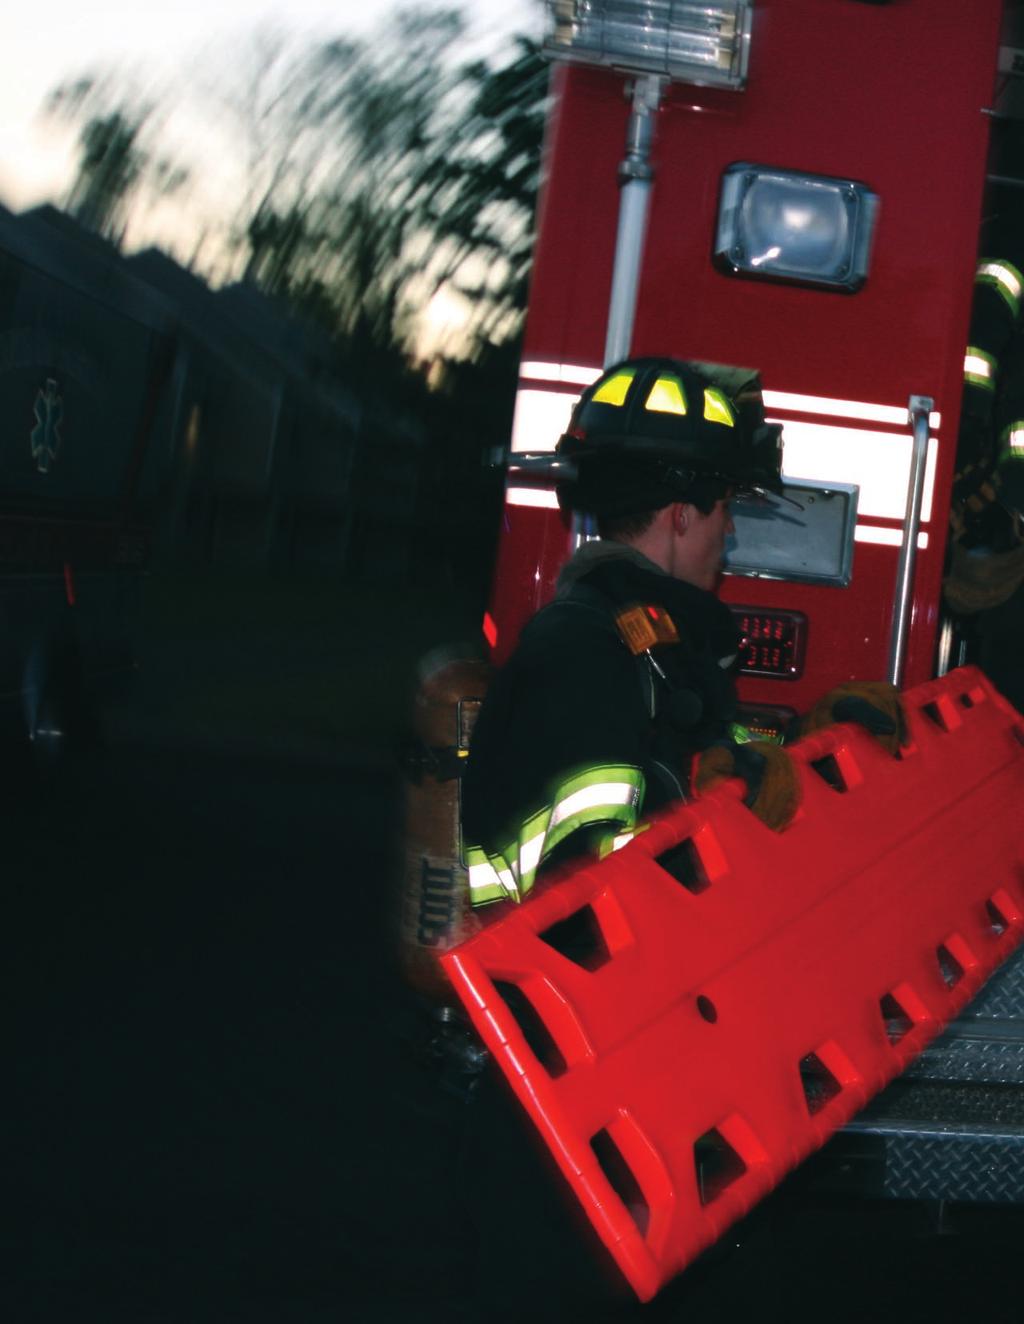 From flexible stretchers to patient immobilization equipment, Reeves stretchers, spine boards, and body covers are built for emergency responders.